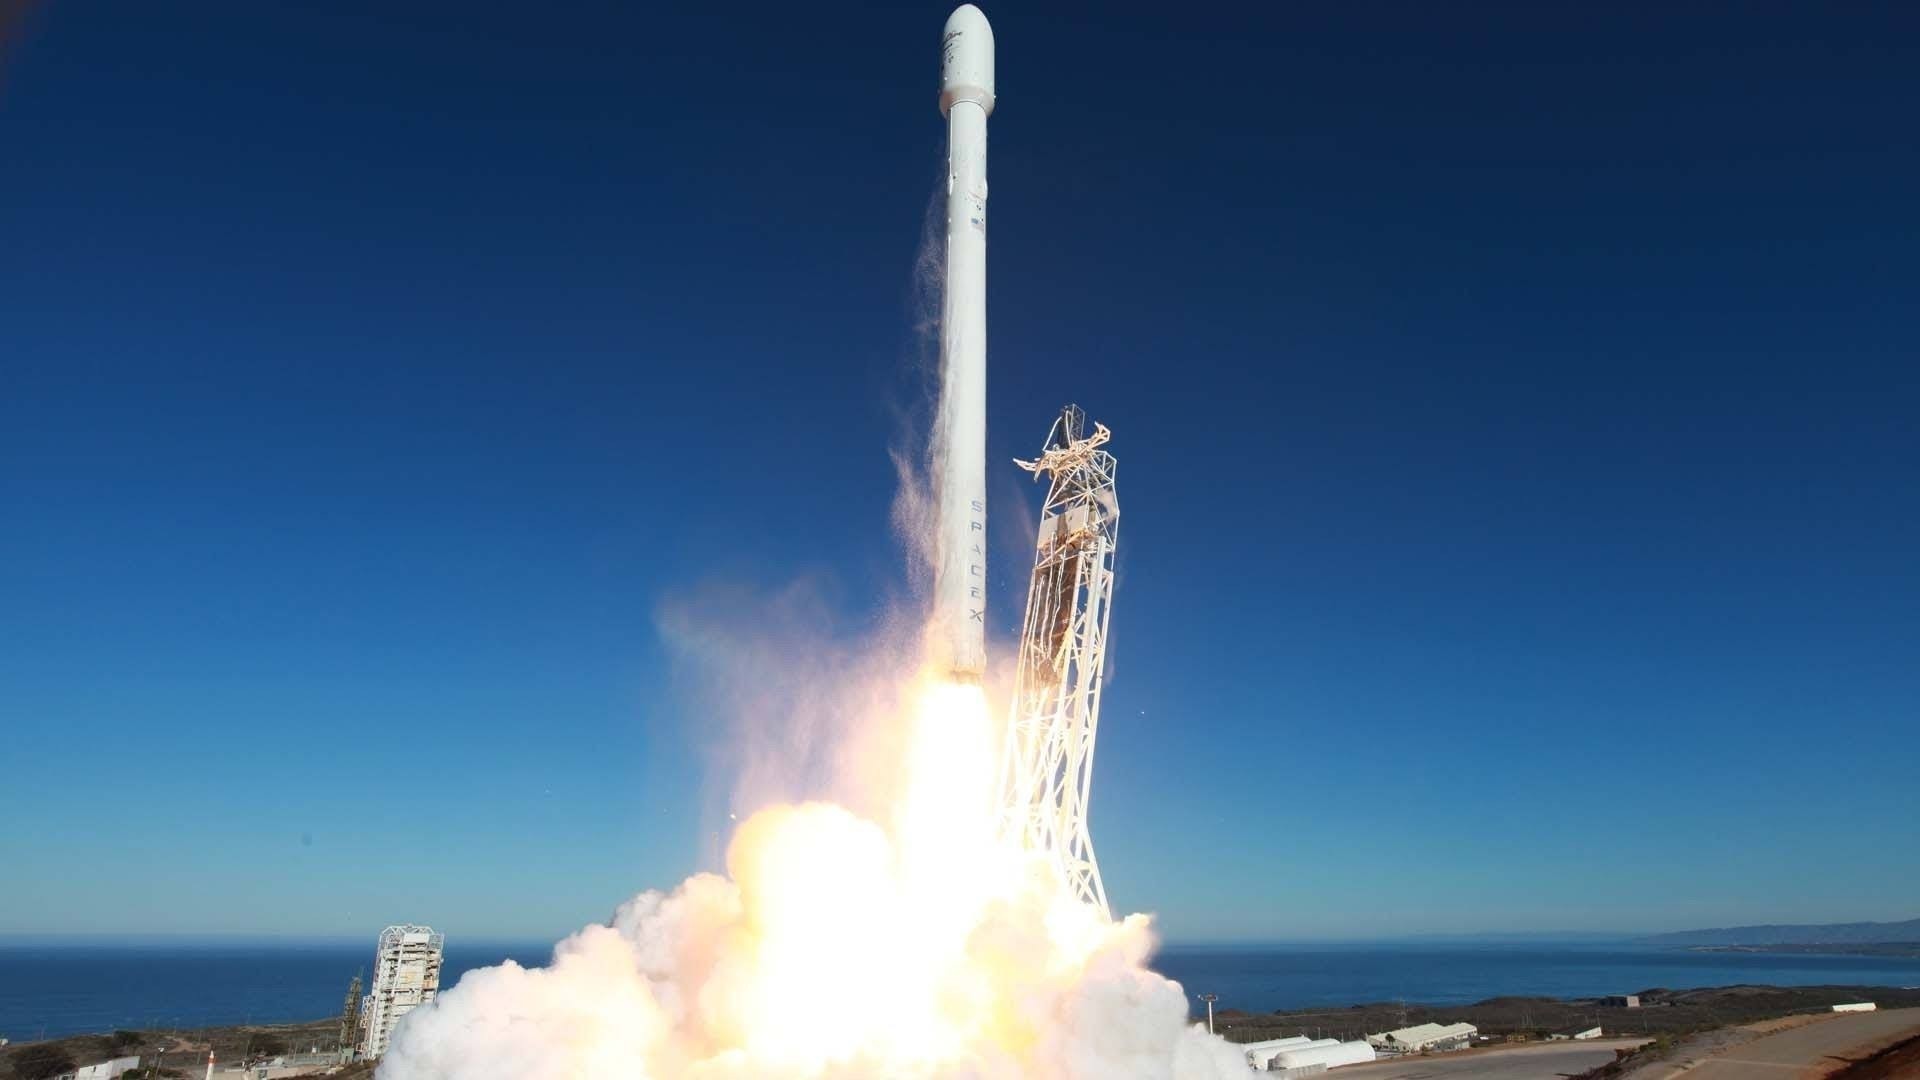 Spacex Wallpaper for pc